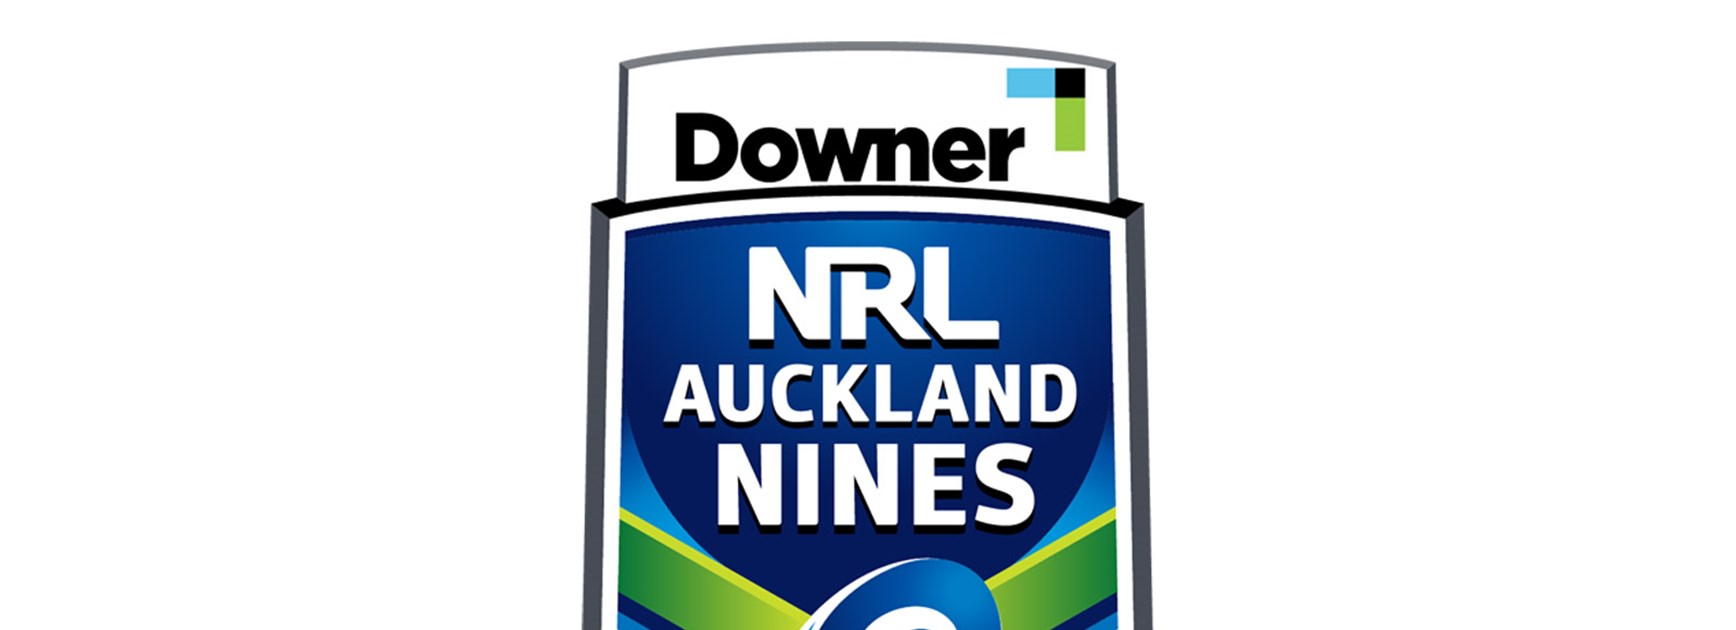 Leading engineering and infrastructure group Downer has taken over as the 2016 Auckland Nines naming rights sponsor.